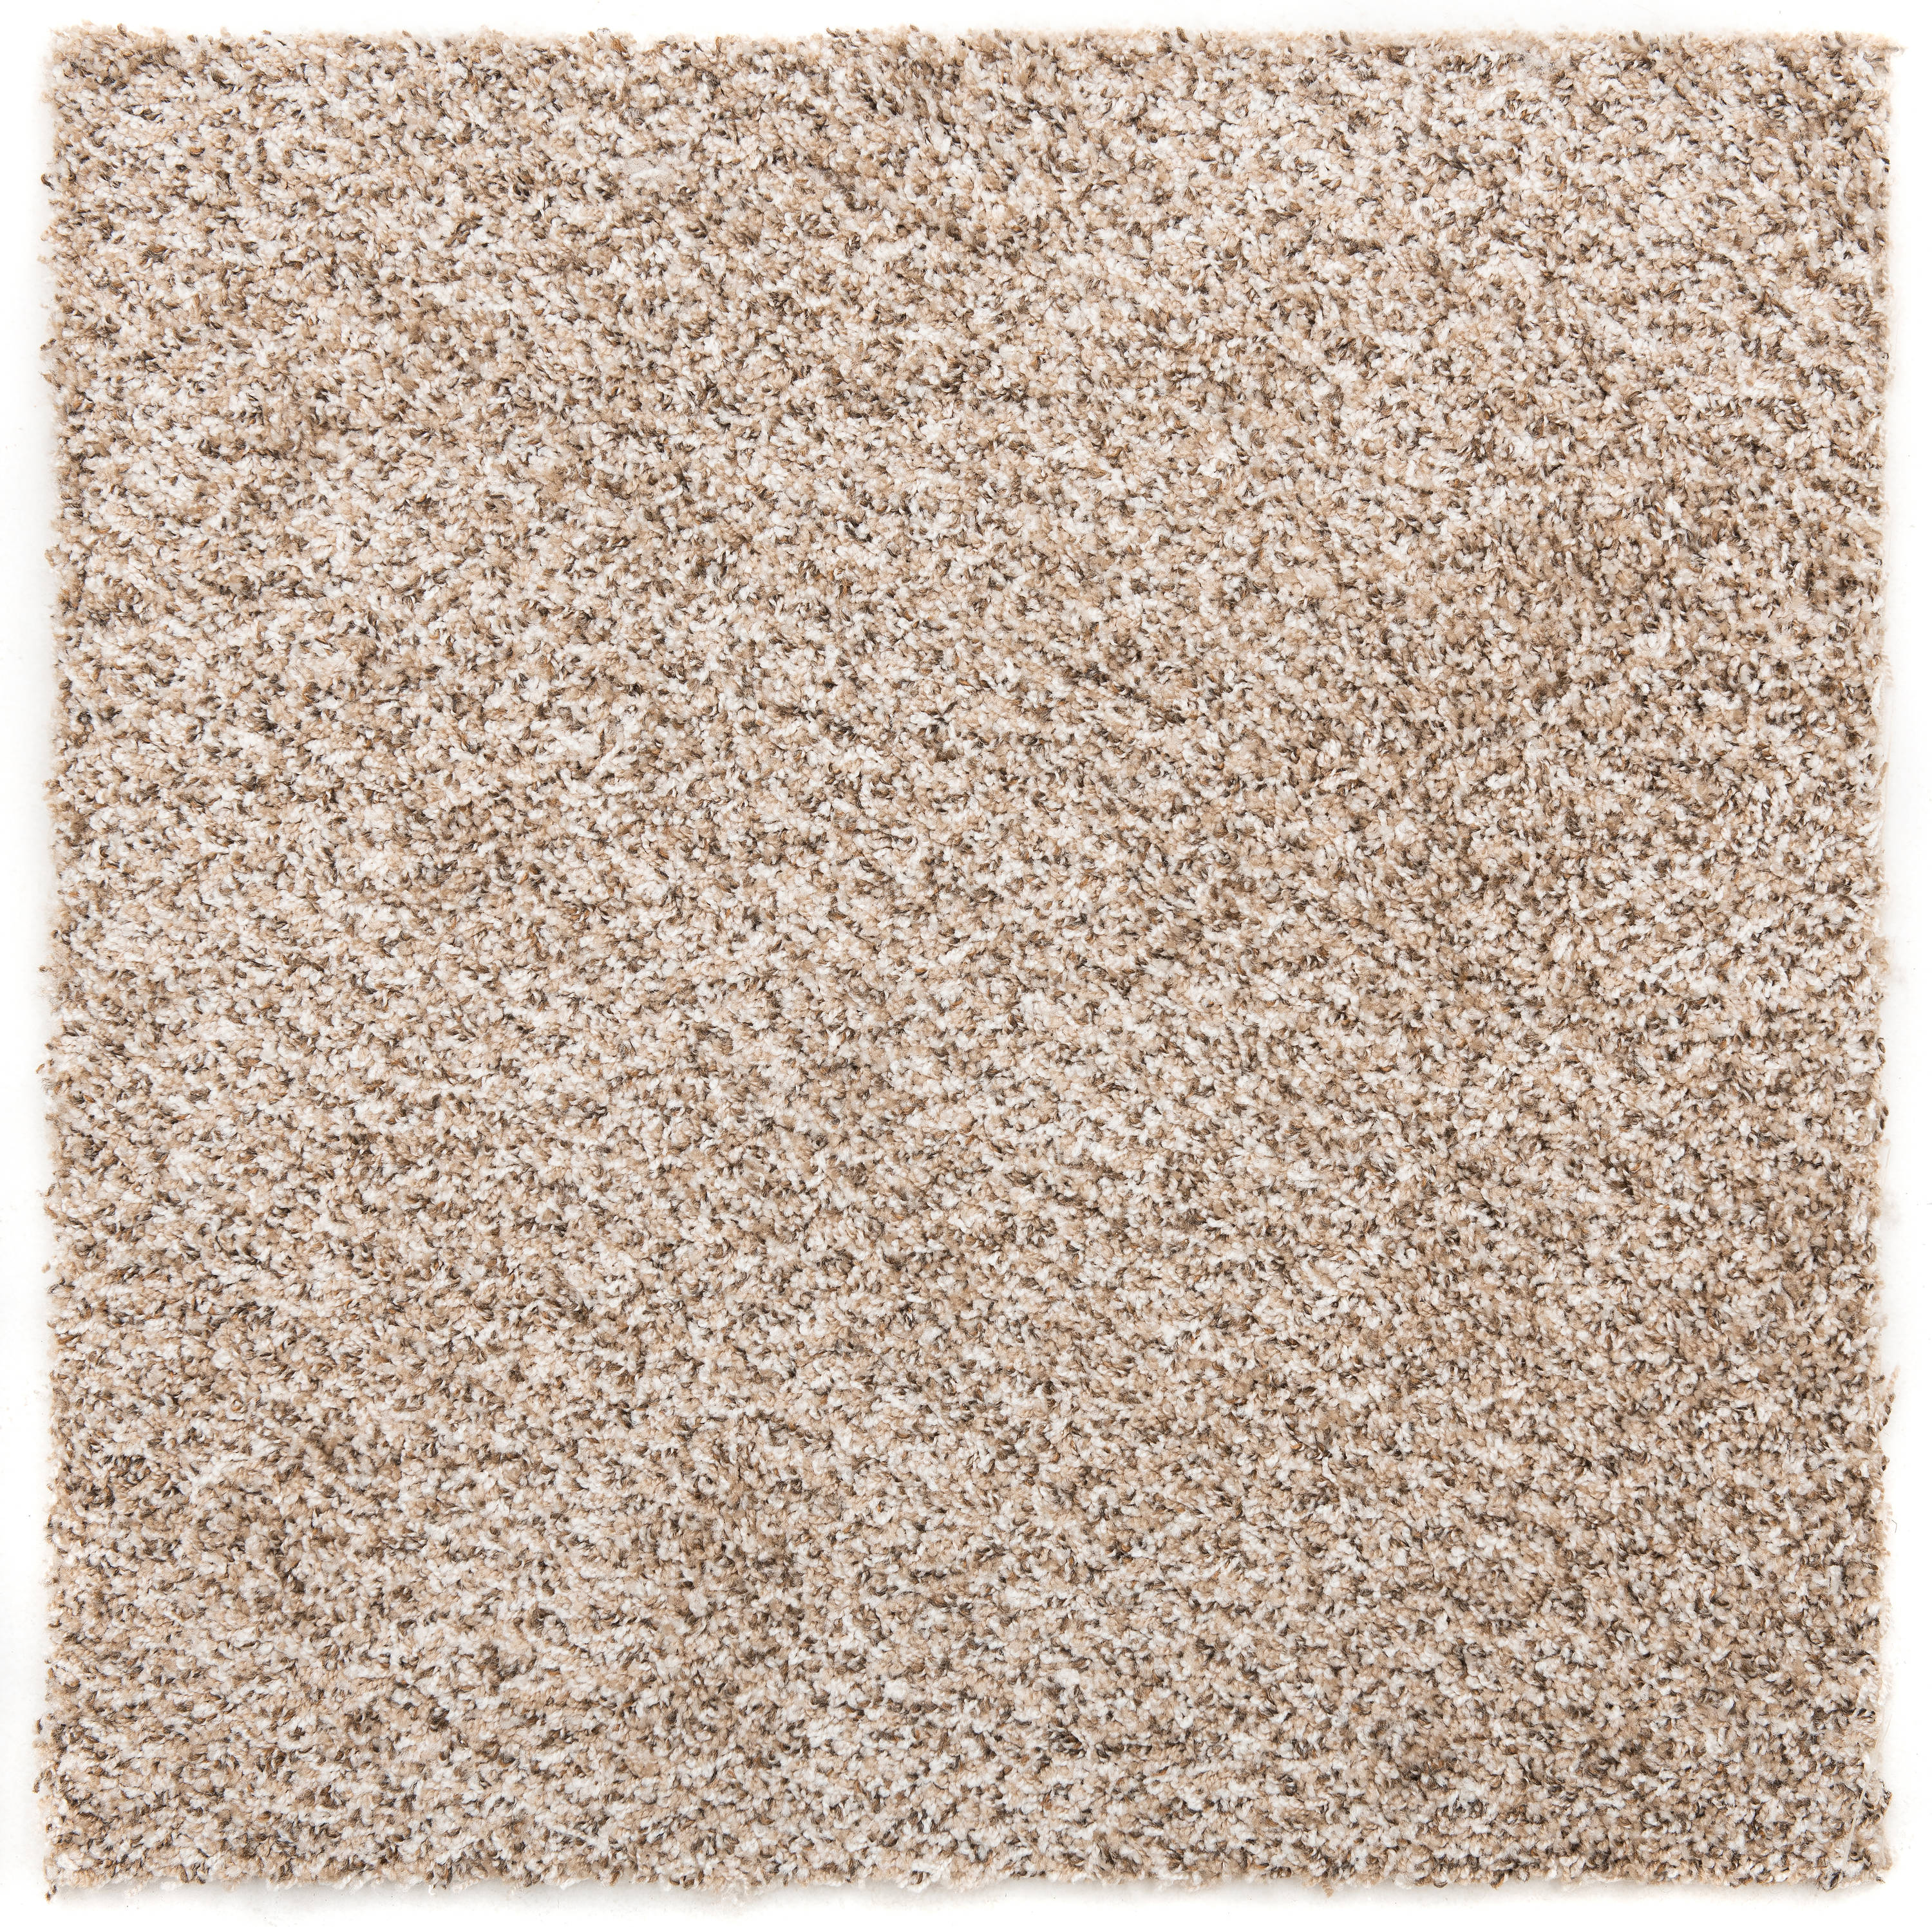 Hábil Gran cantidad Volcánico Nance 24-in x 24-in Light Shag/Frieze Adhesive-backed Carpet Tile (24-sq  ft) in the Carpet Tile department at Lowes.com